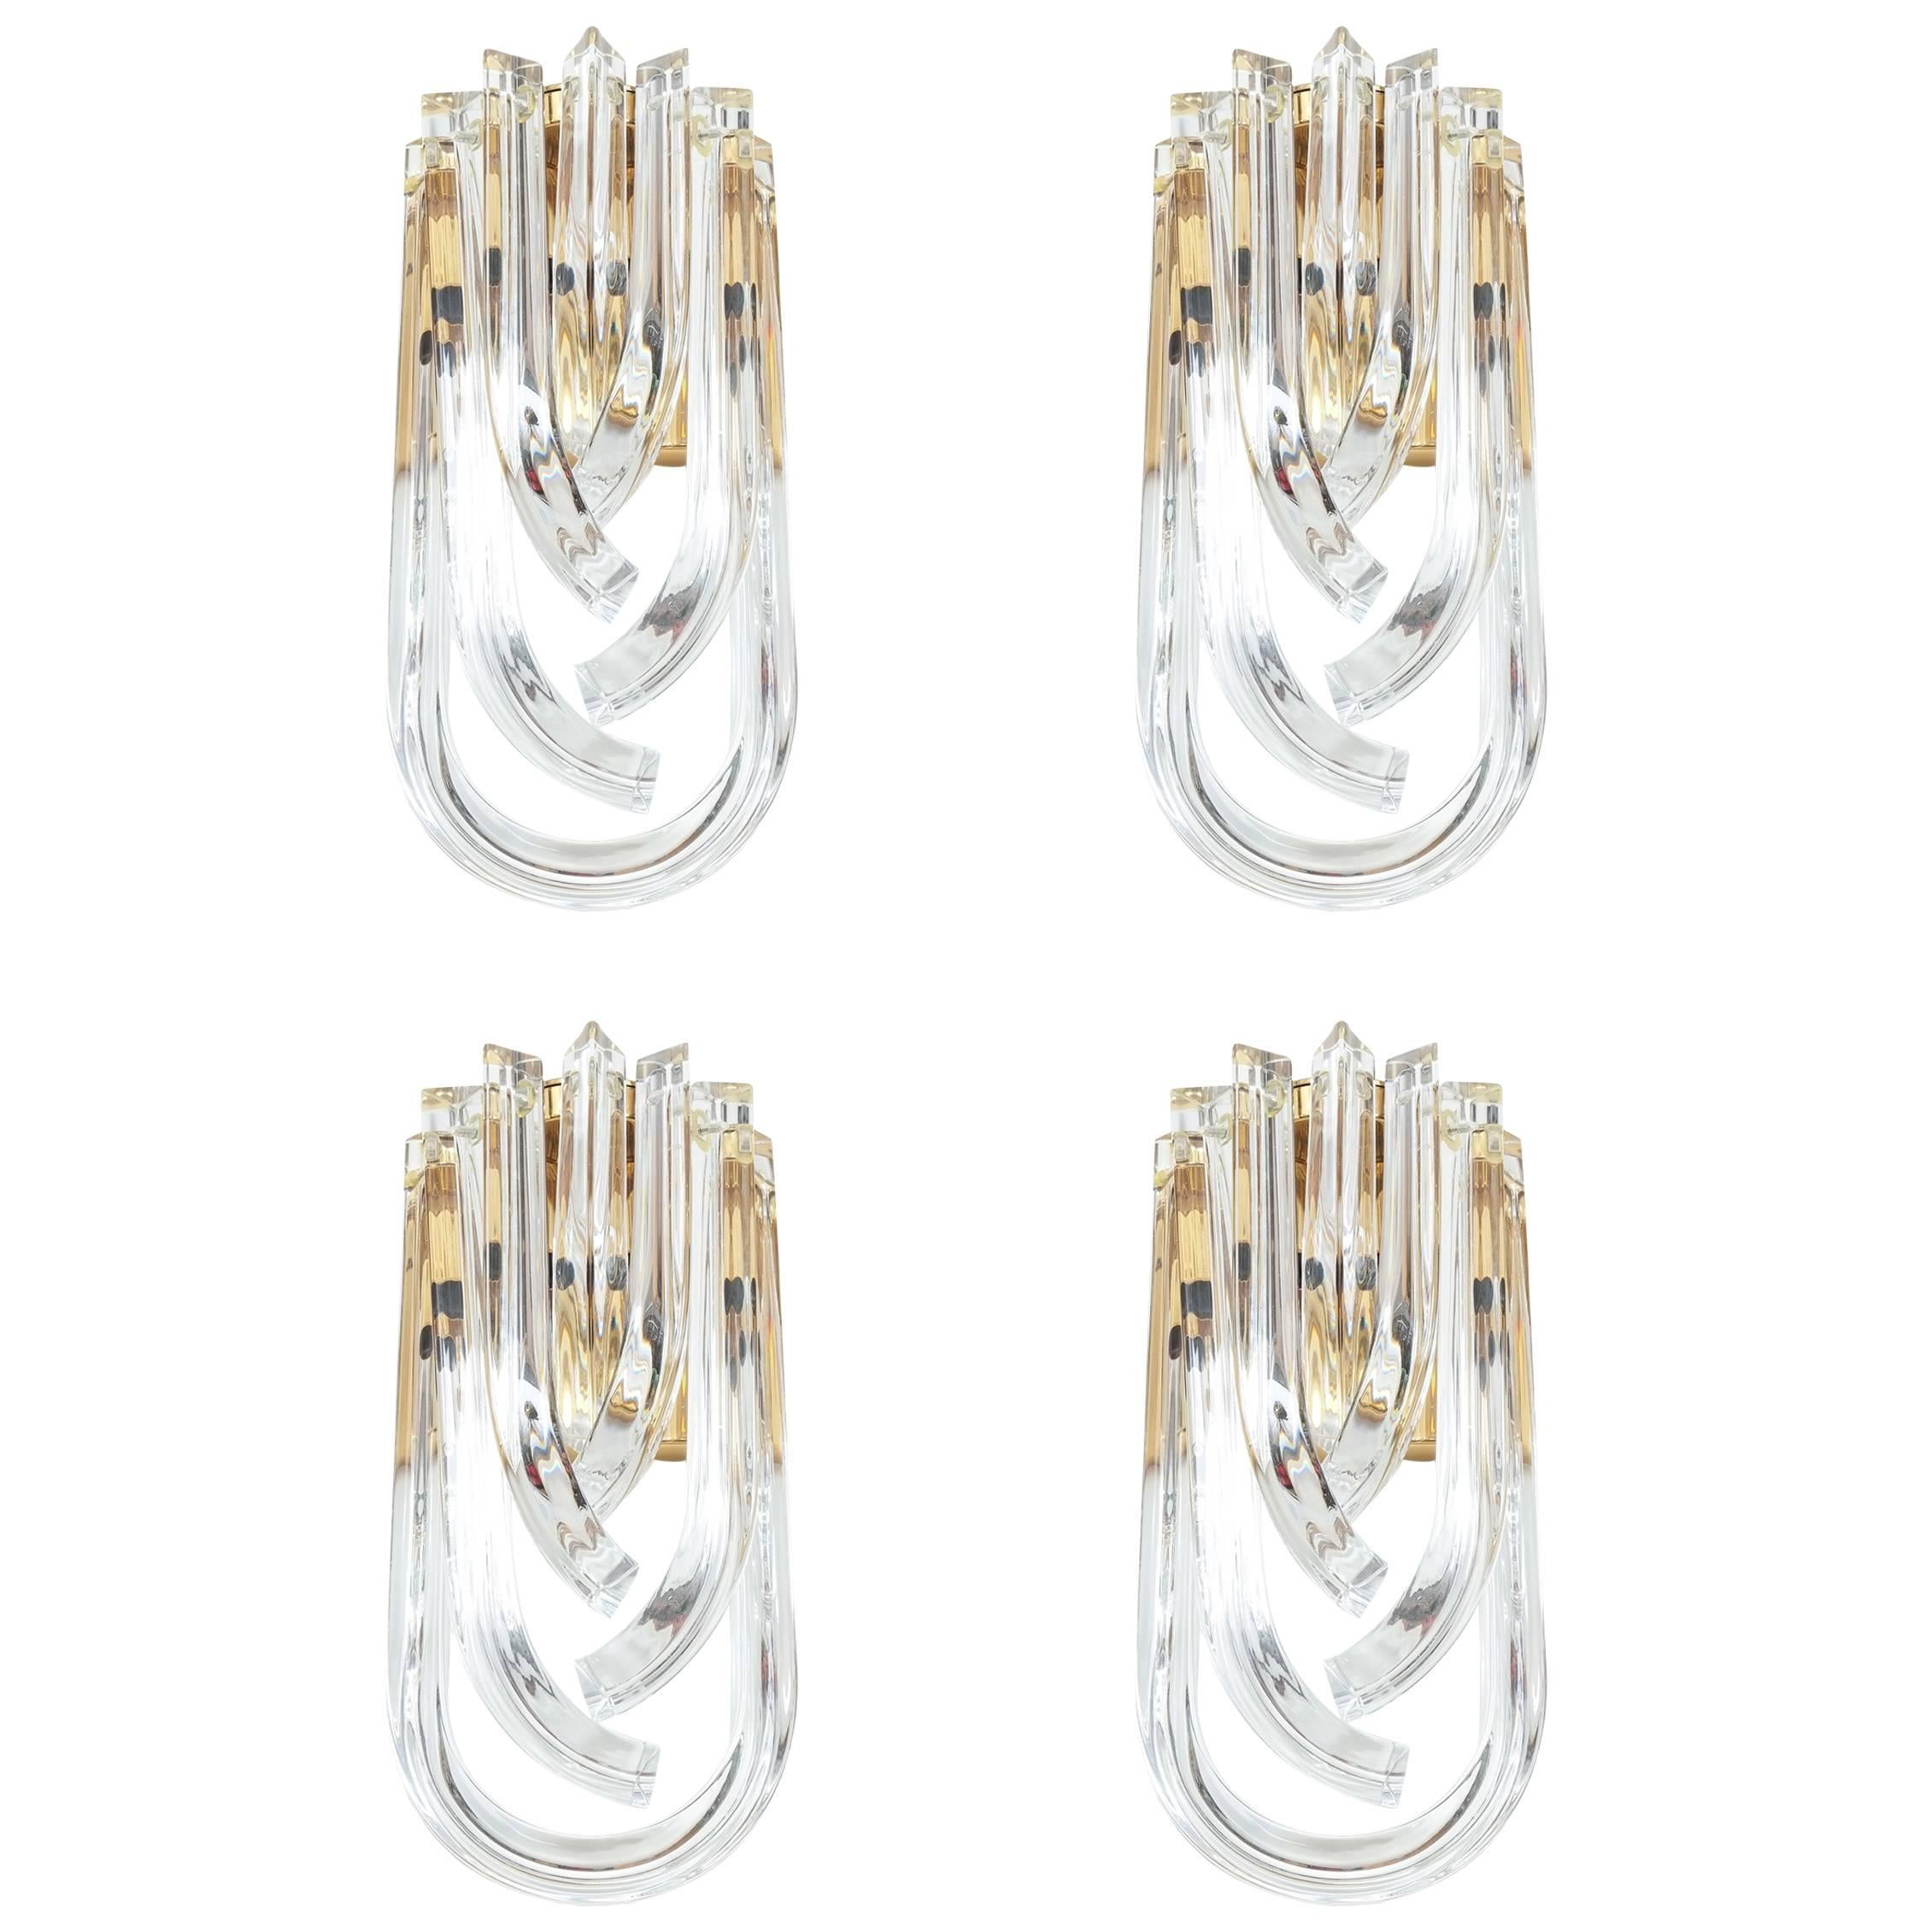 Large Venini Curved Crystal Gilt Brass Sconces (4) , Italy 1960